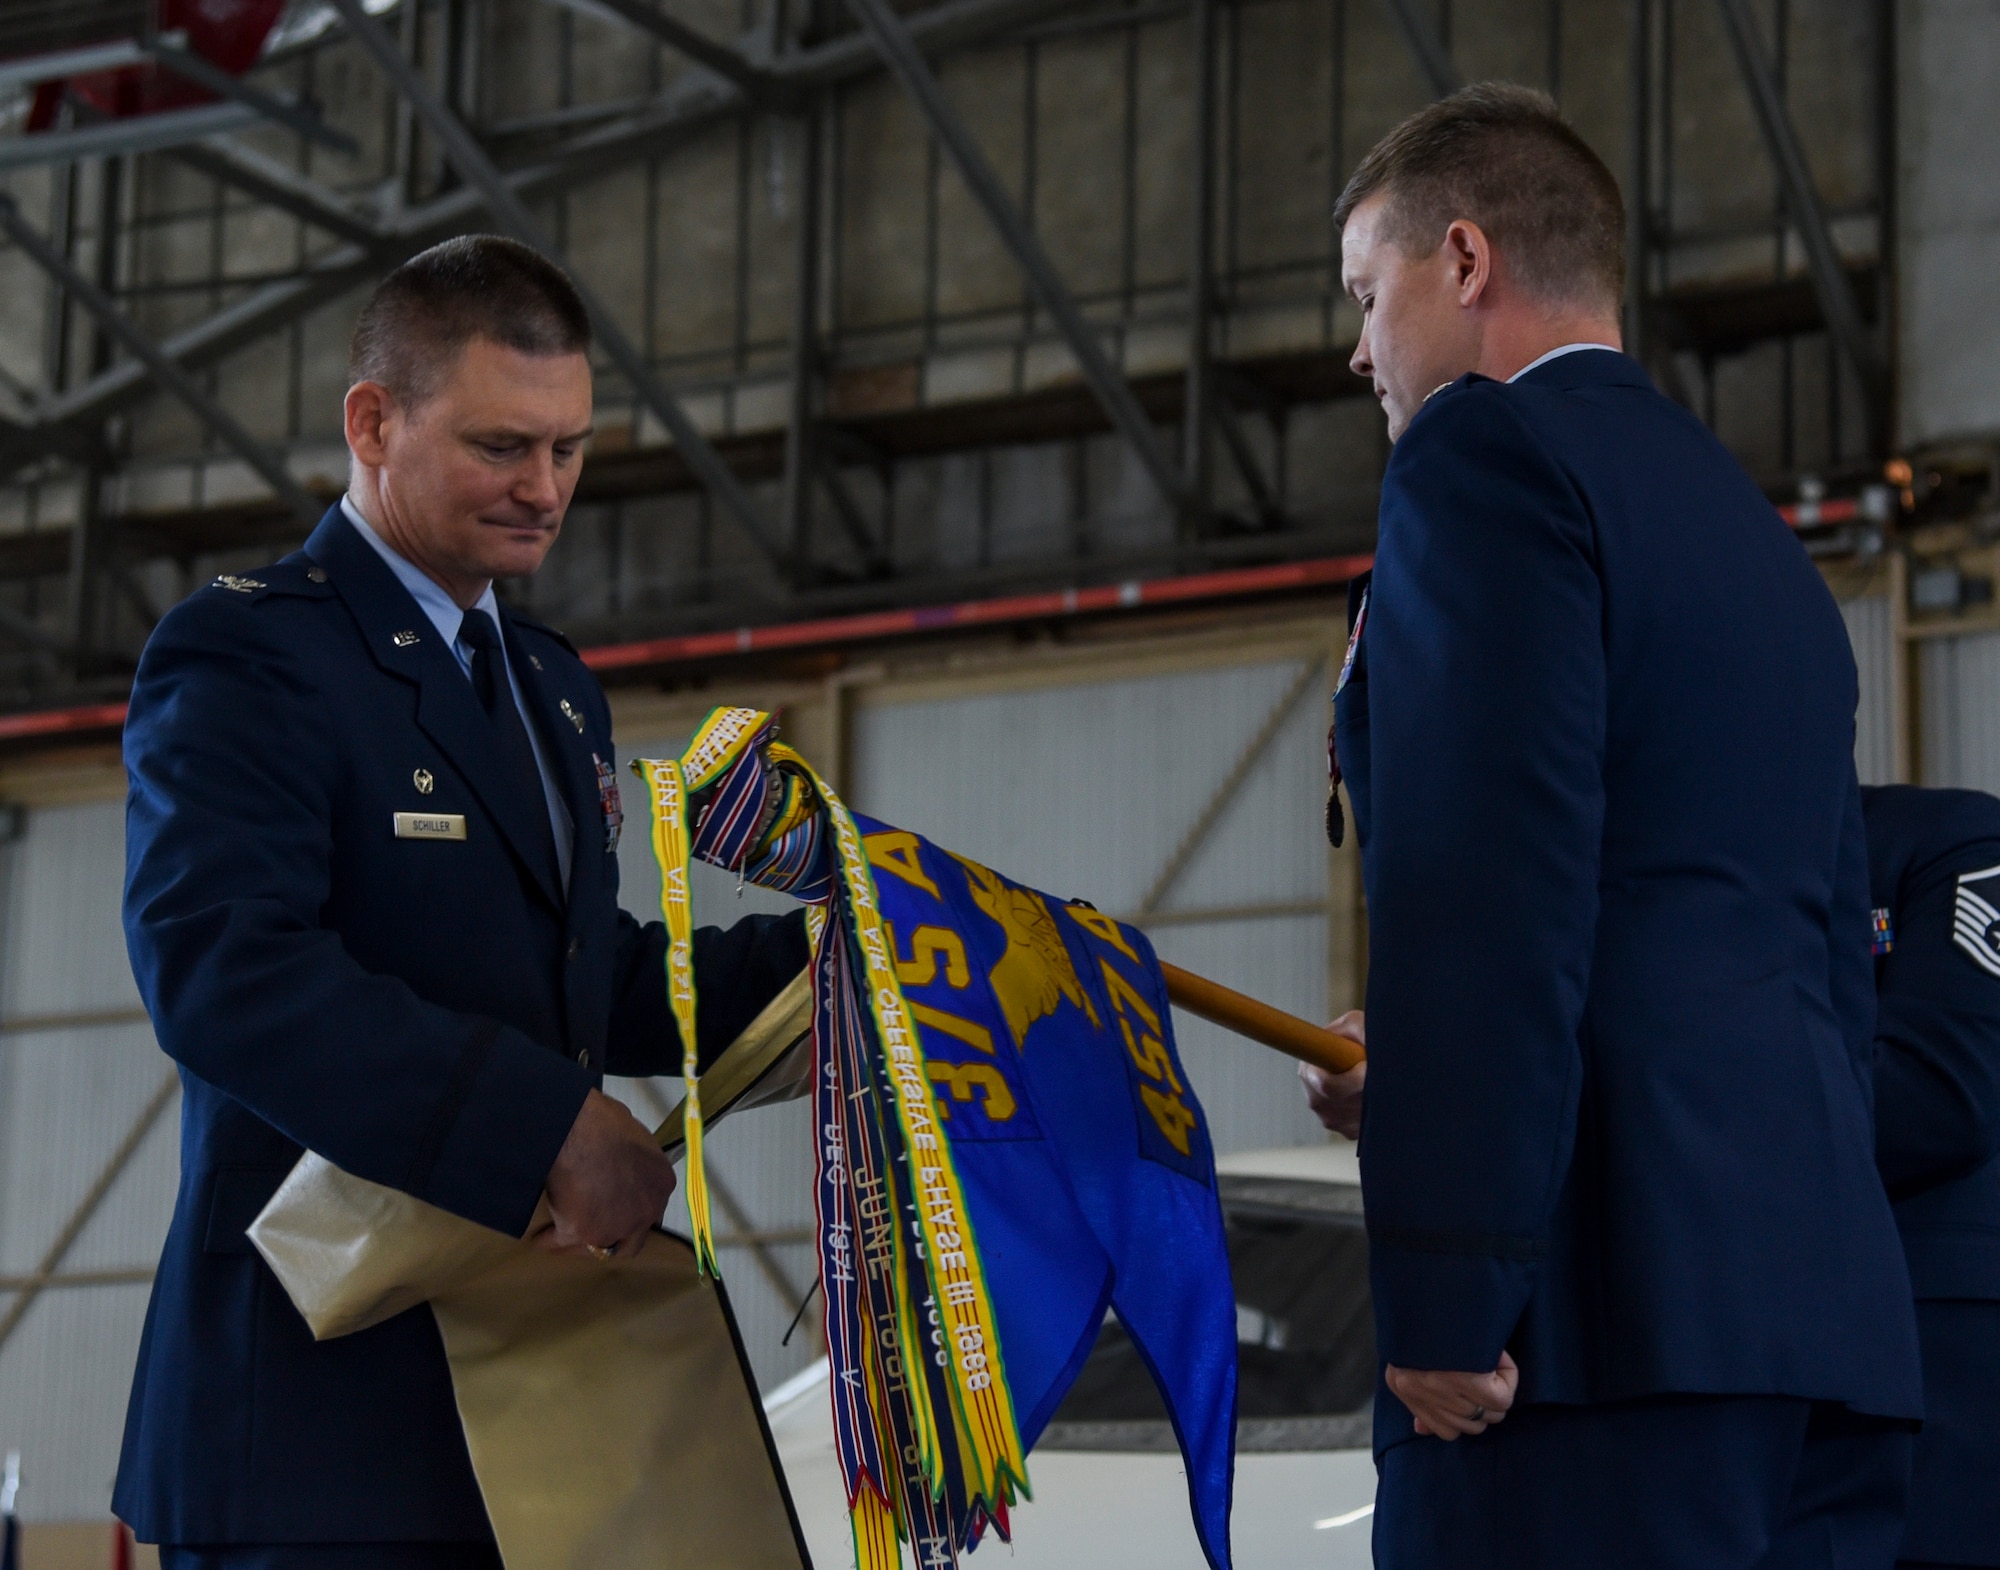 Col. Kevin Schiller, 375th Operations Group commander, and Lt. Col. Royce Lippert, 457th Airlift Squadron commander, furl the 457th flag during an inactivation ceremony at Joint Base Andrews, Maryland, June 14, 2019. The 457th AS was first stood up as the 457th Heavy Bombardment Squadron on July 1, 1942, and was responsible for training stateside aircrews in the B-17 Flying Fortress and B-24 Liberator. (U.S. Air Force photo by Senior Airman Chad Gorecki)